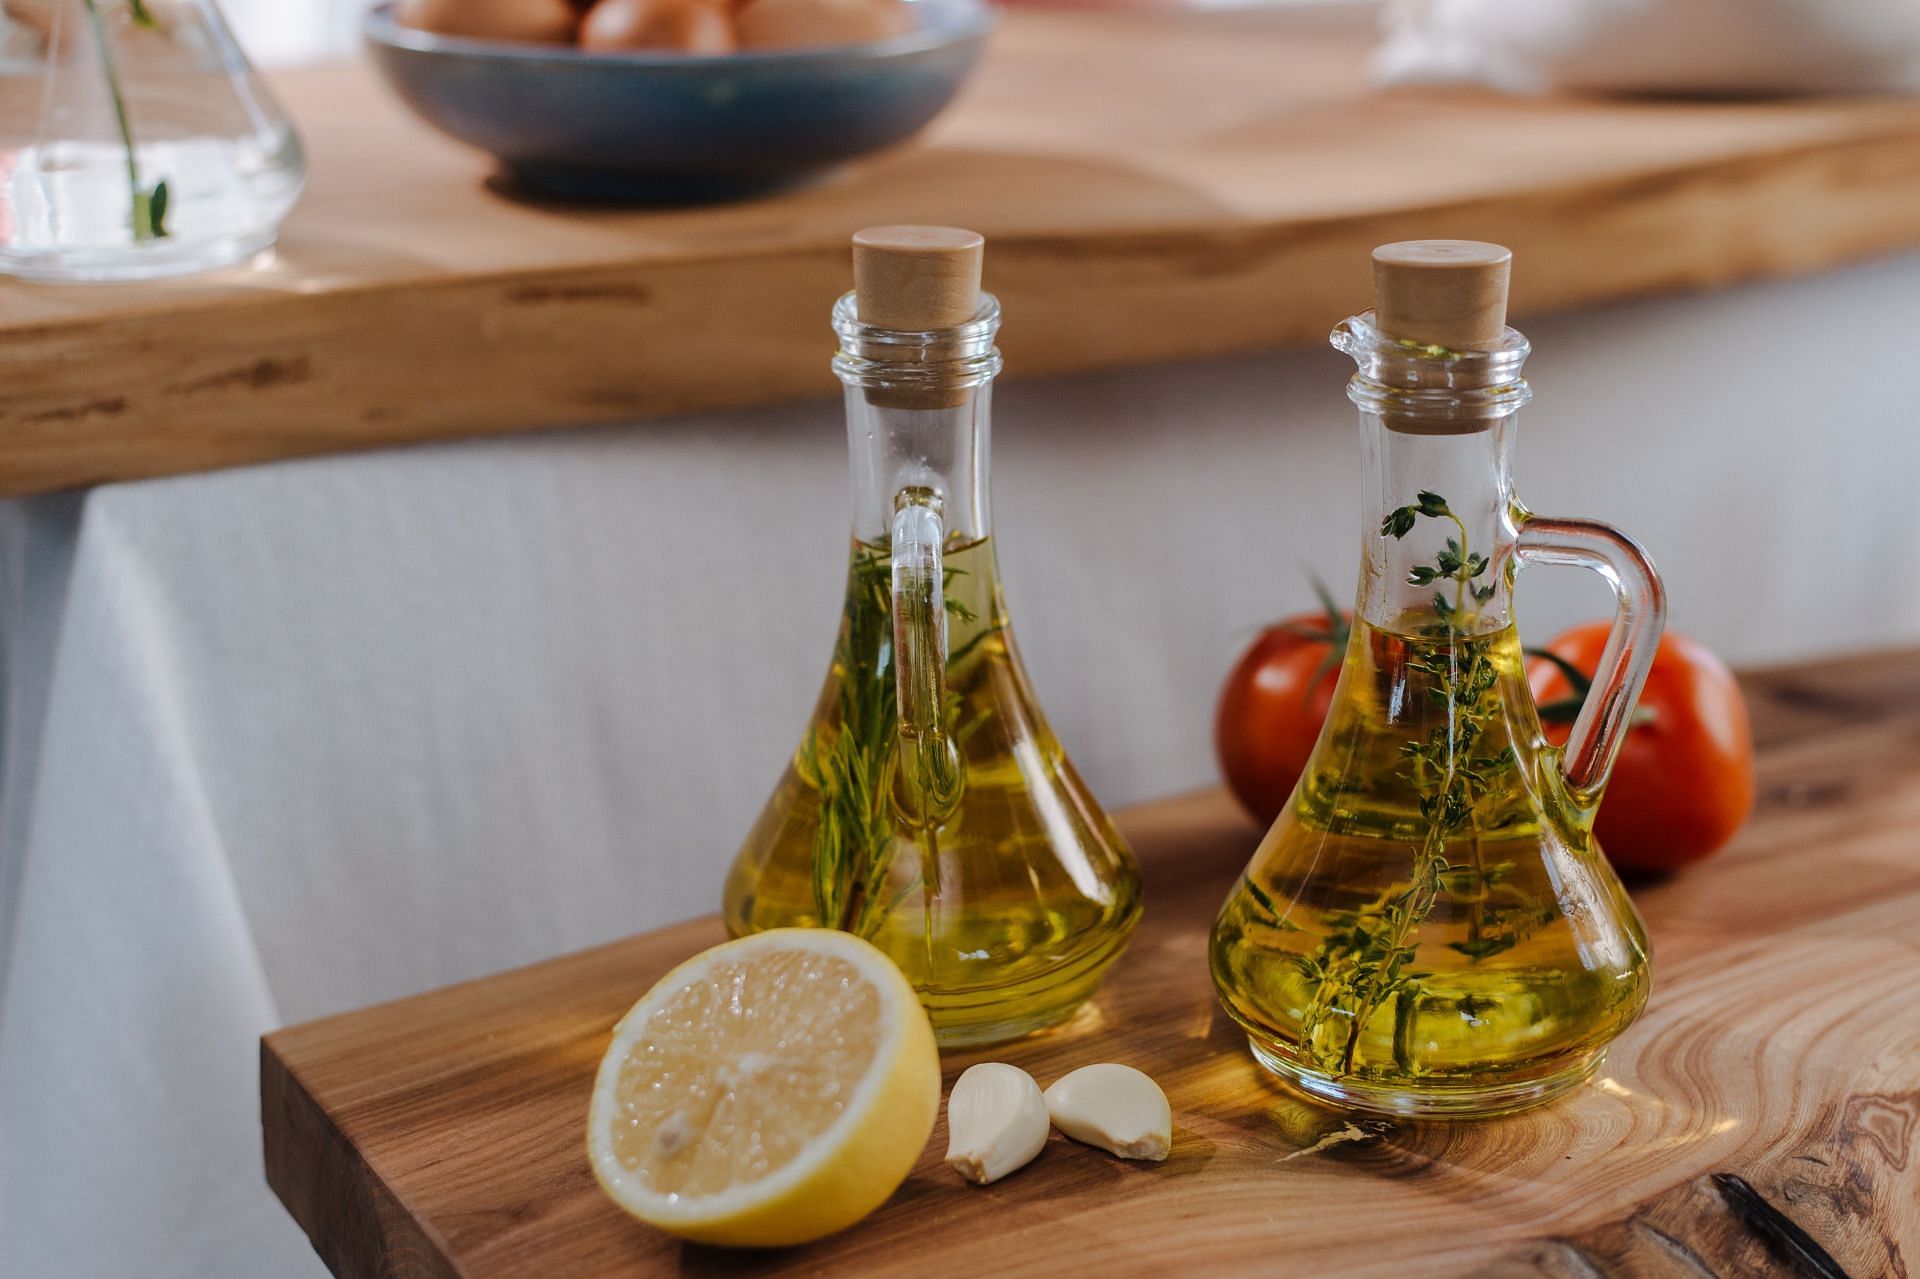 Garlic oil for ears can be prepared at home. (Image via Pexels/ Ron Lach)